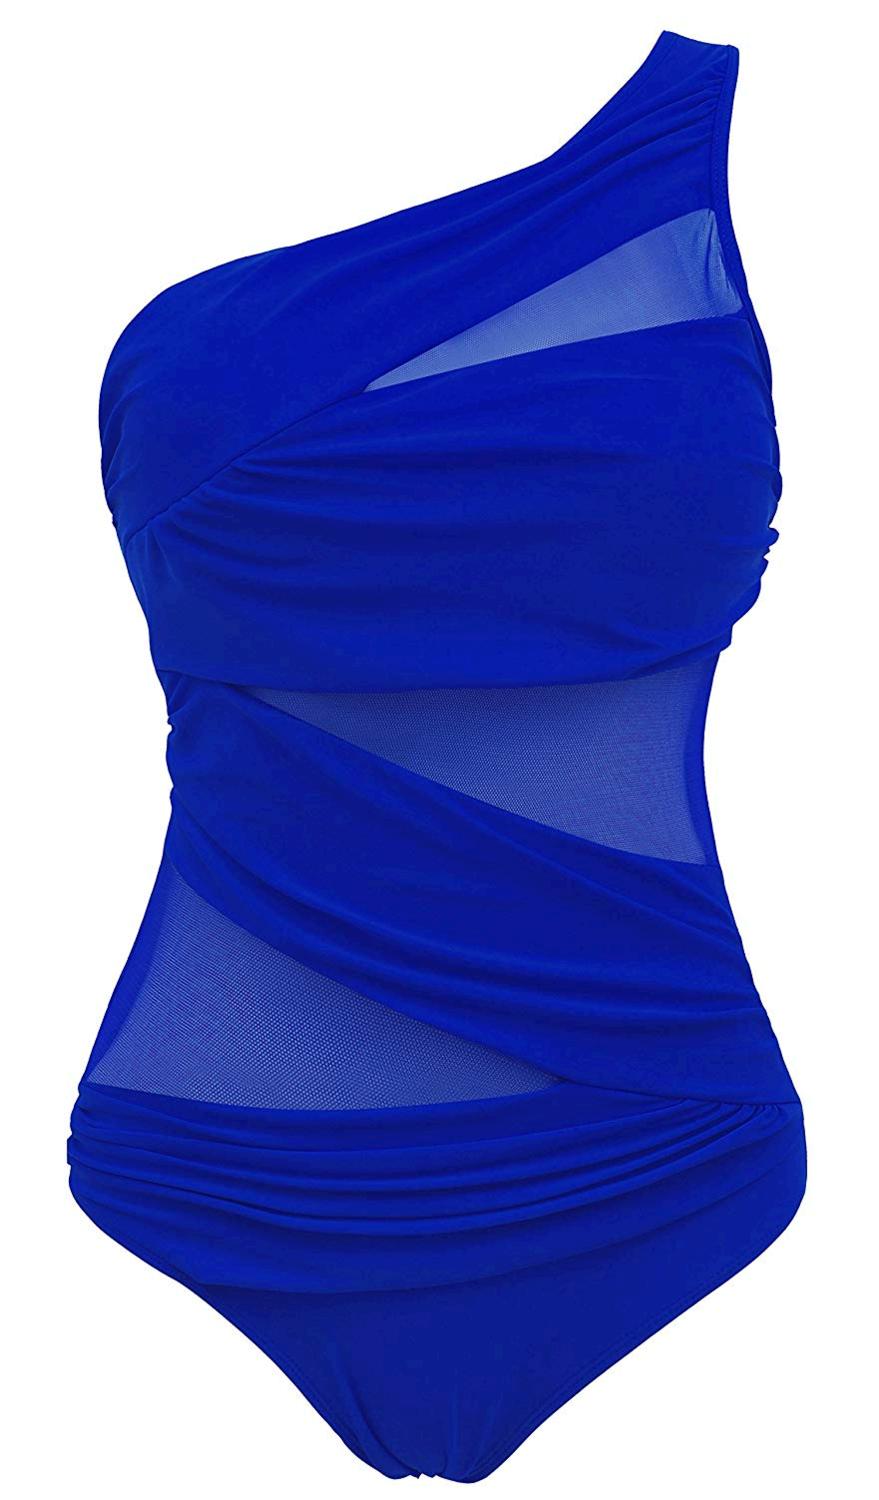 Runtlly One-Shoulder One Piece Swimsuit, Women's Plus Size, Blue, Size ...